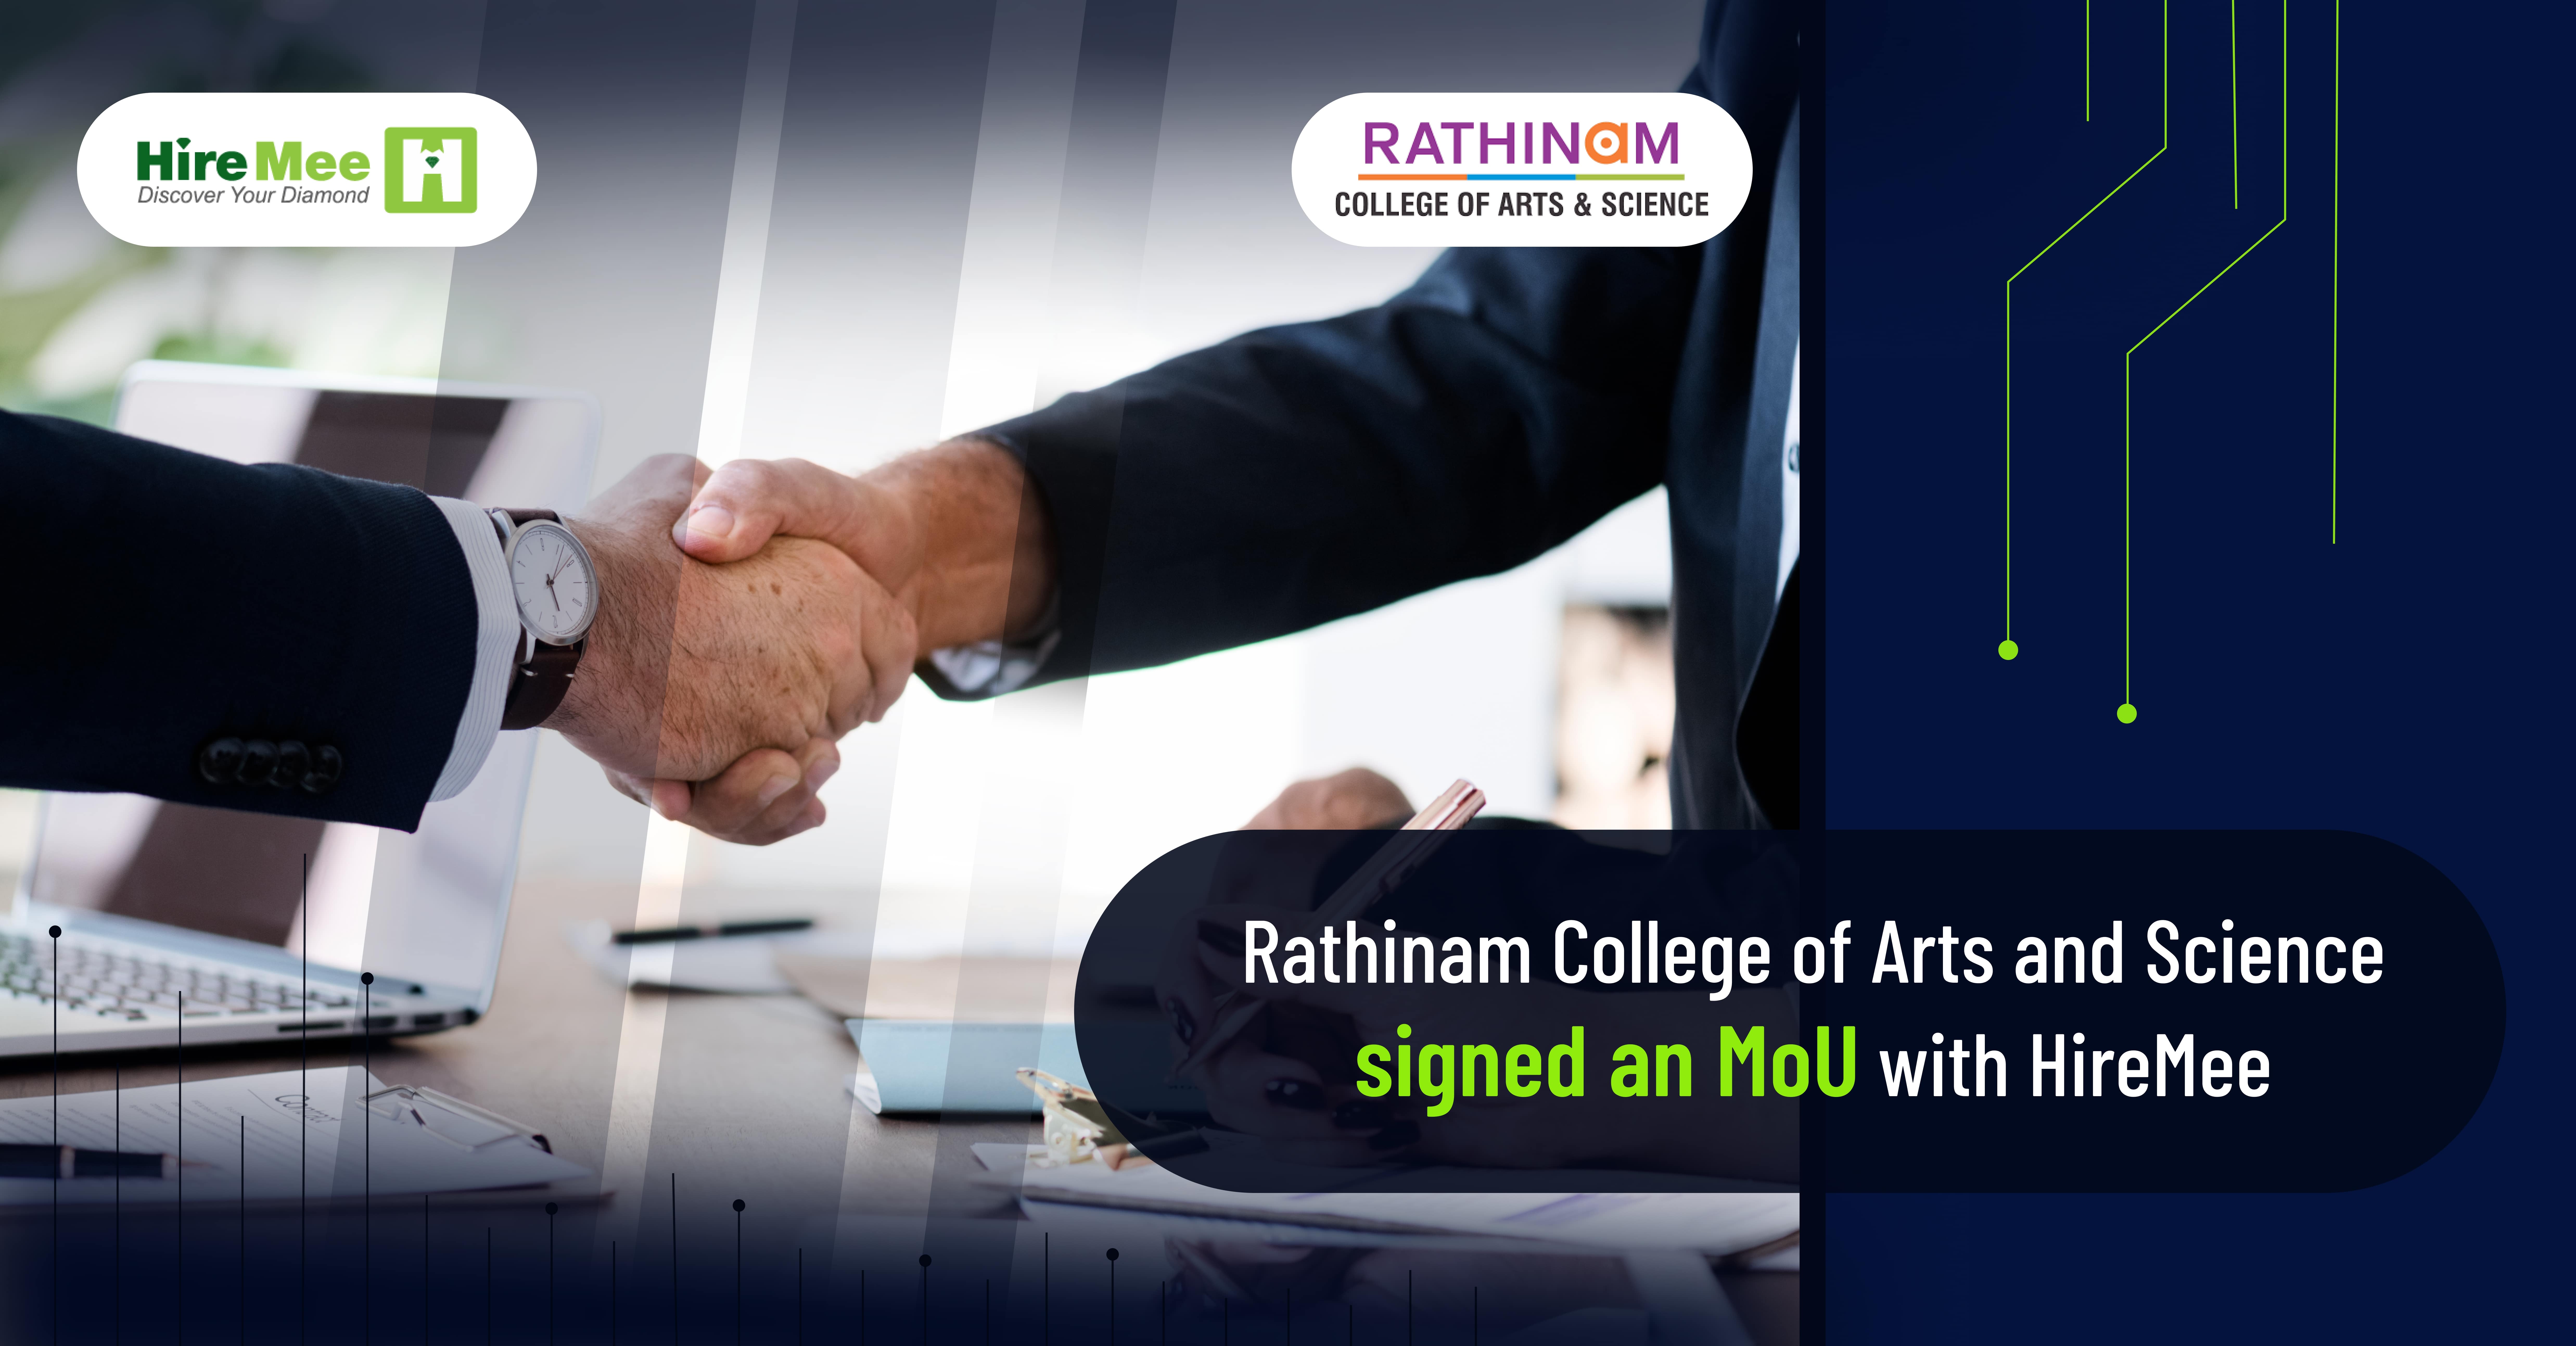 Rathinam College of Arts and Science Signs MoU with HireMee